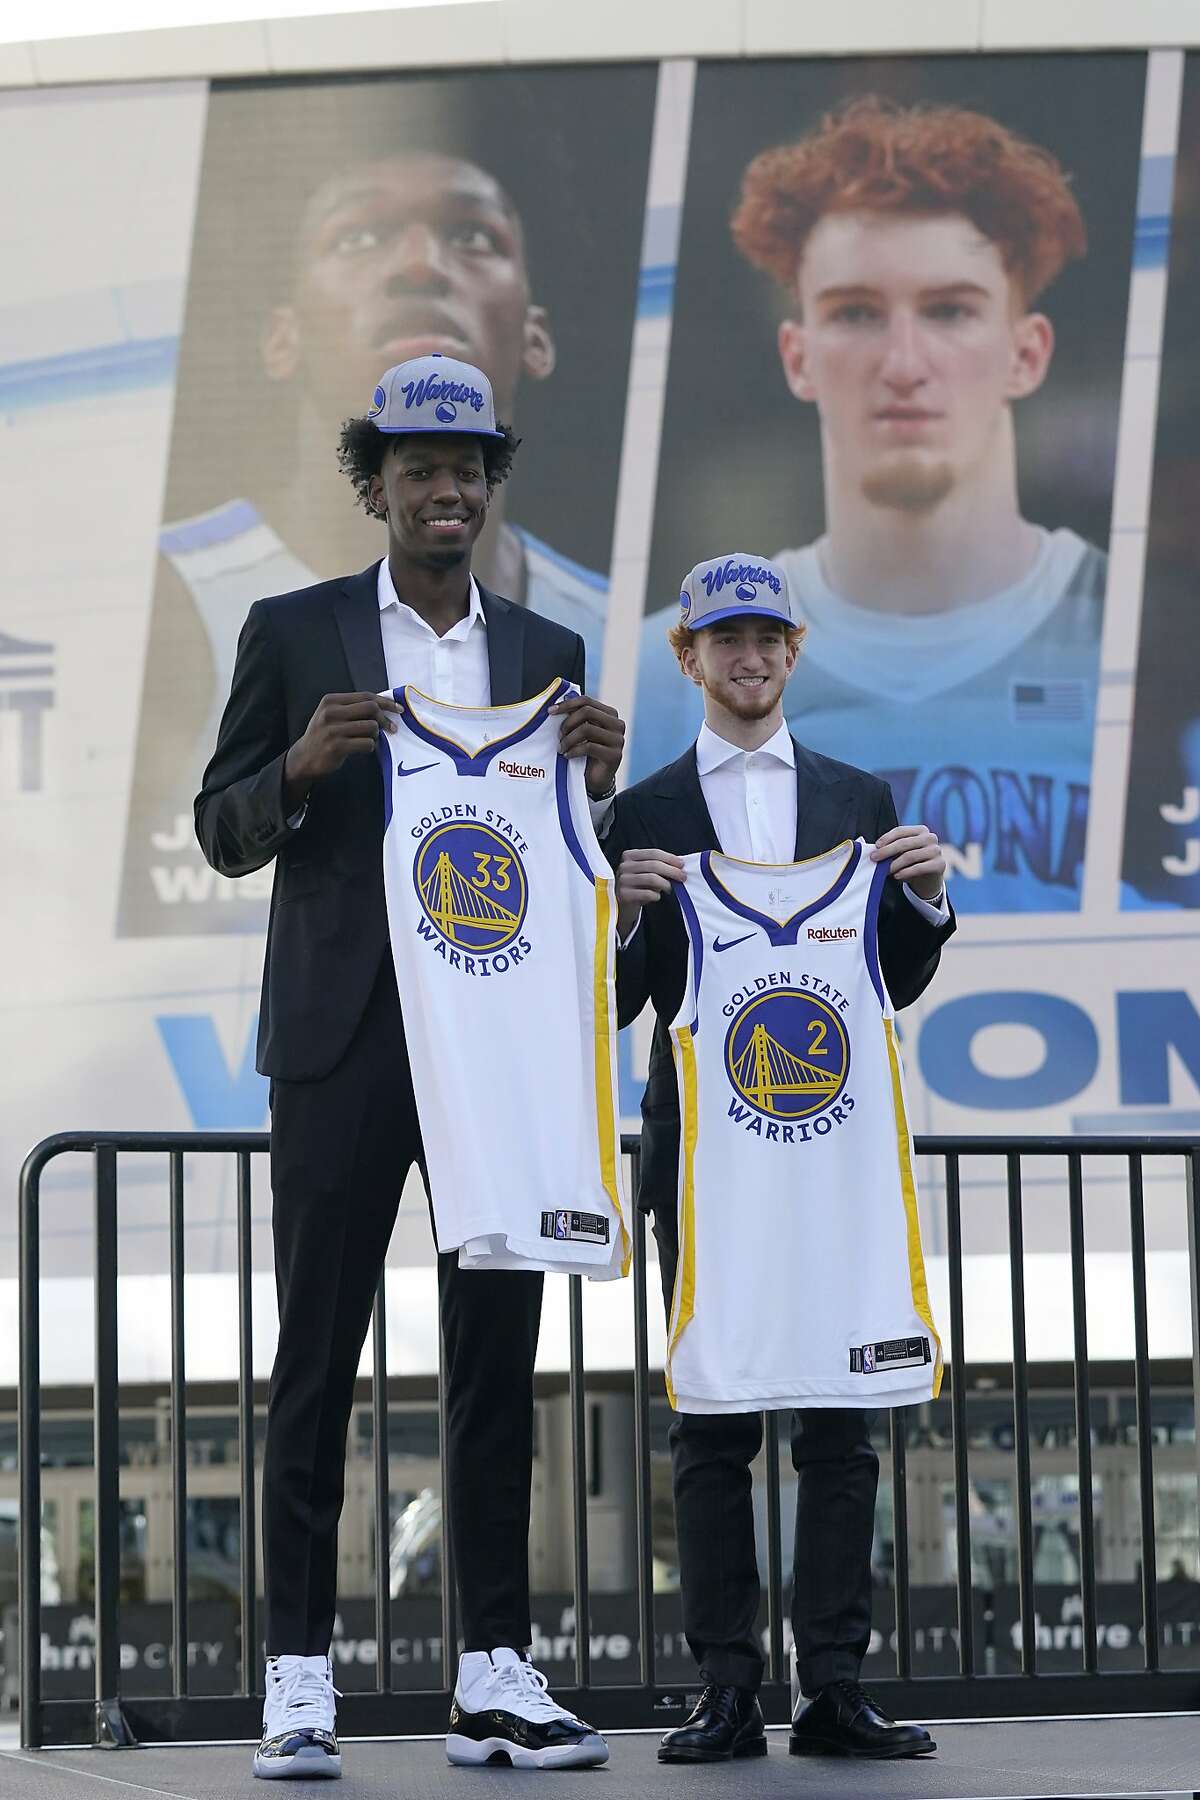 James Wiseman, towering over Nico Mannion, was the Warriors’ big pickup in the NBA draft on Wednesday. Several draft analysts lauded Golden State for the pick.